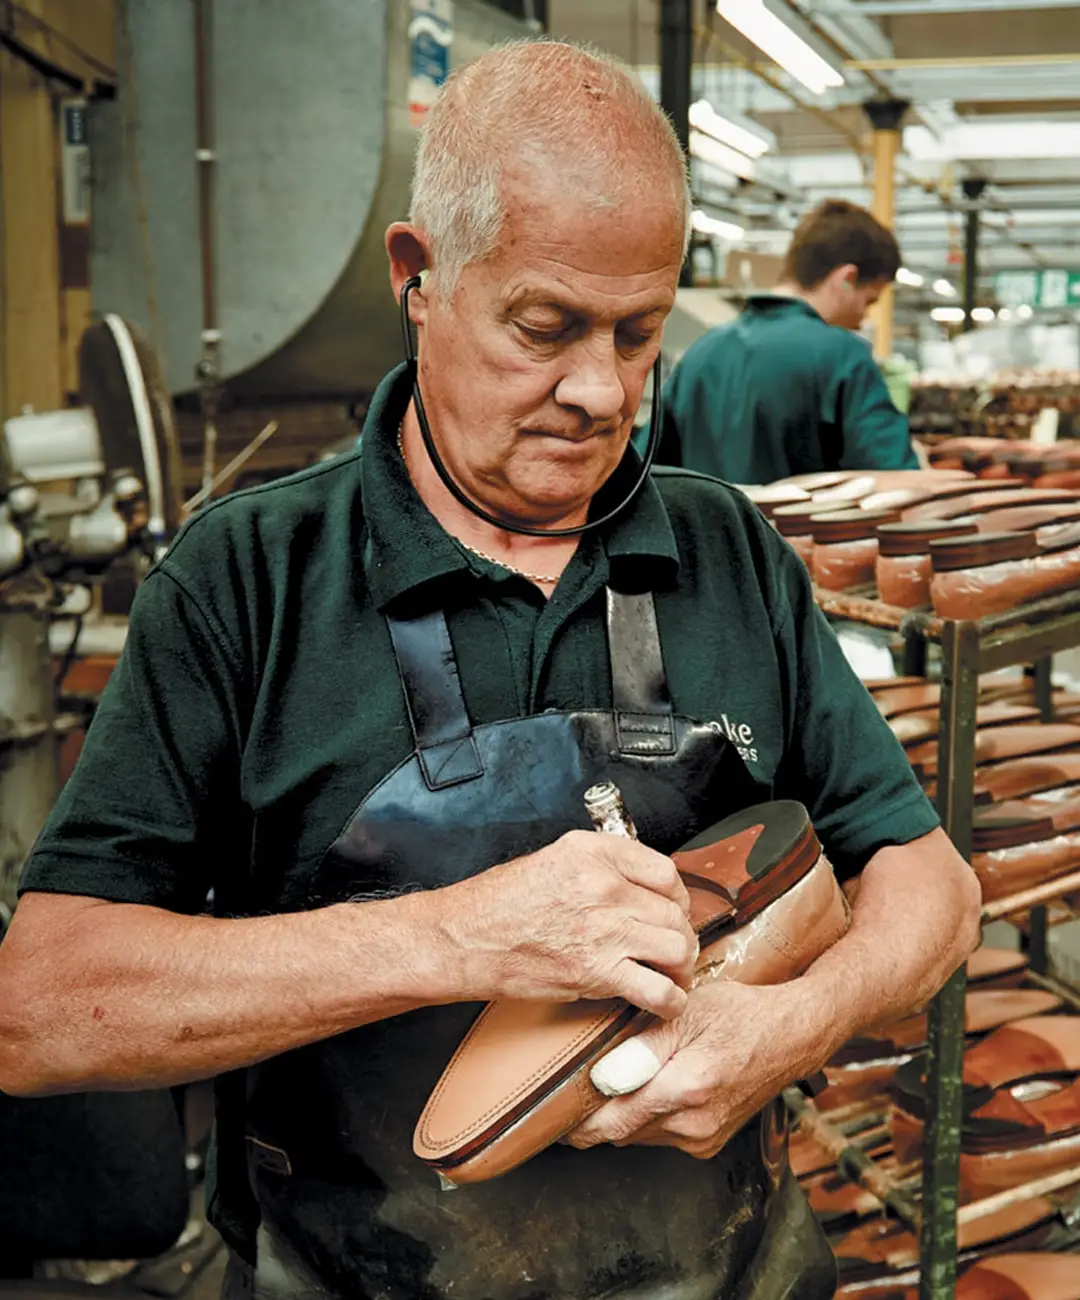 Loake craftsman holding a leather sole English made shoe, working hard on a Loake Factory Repair.